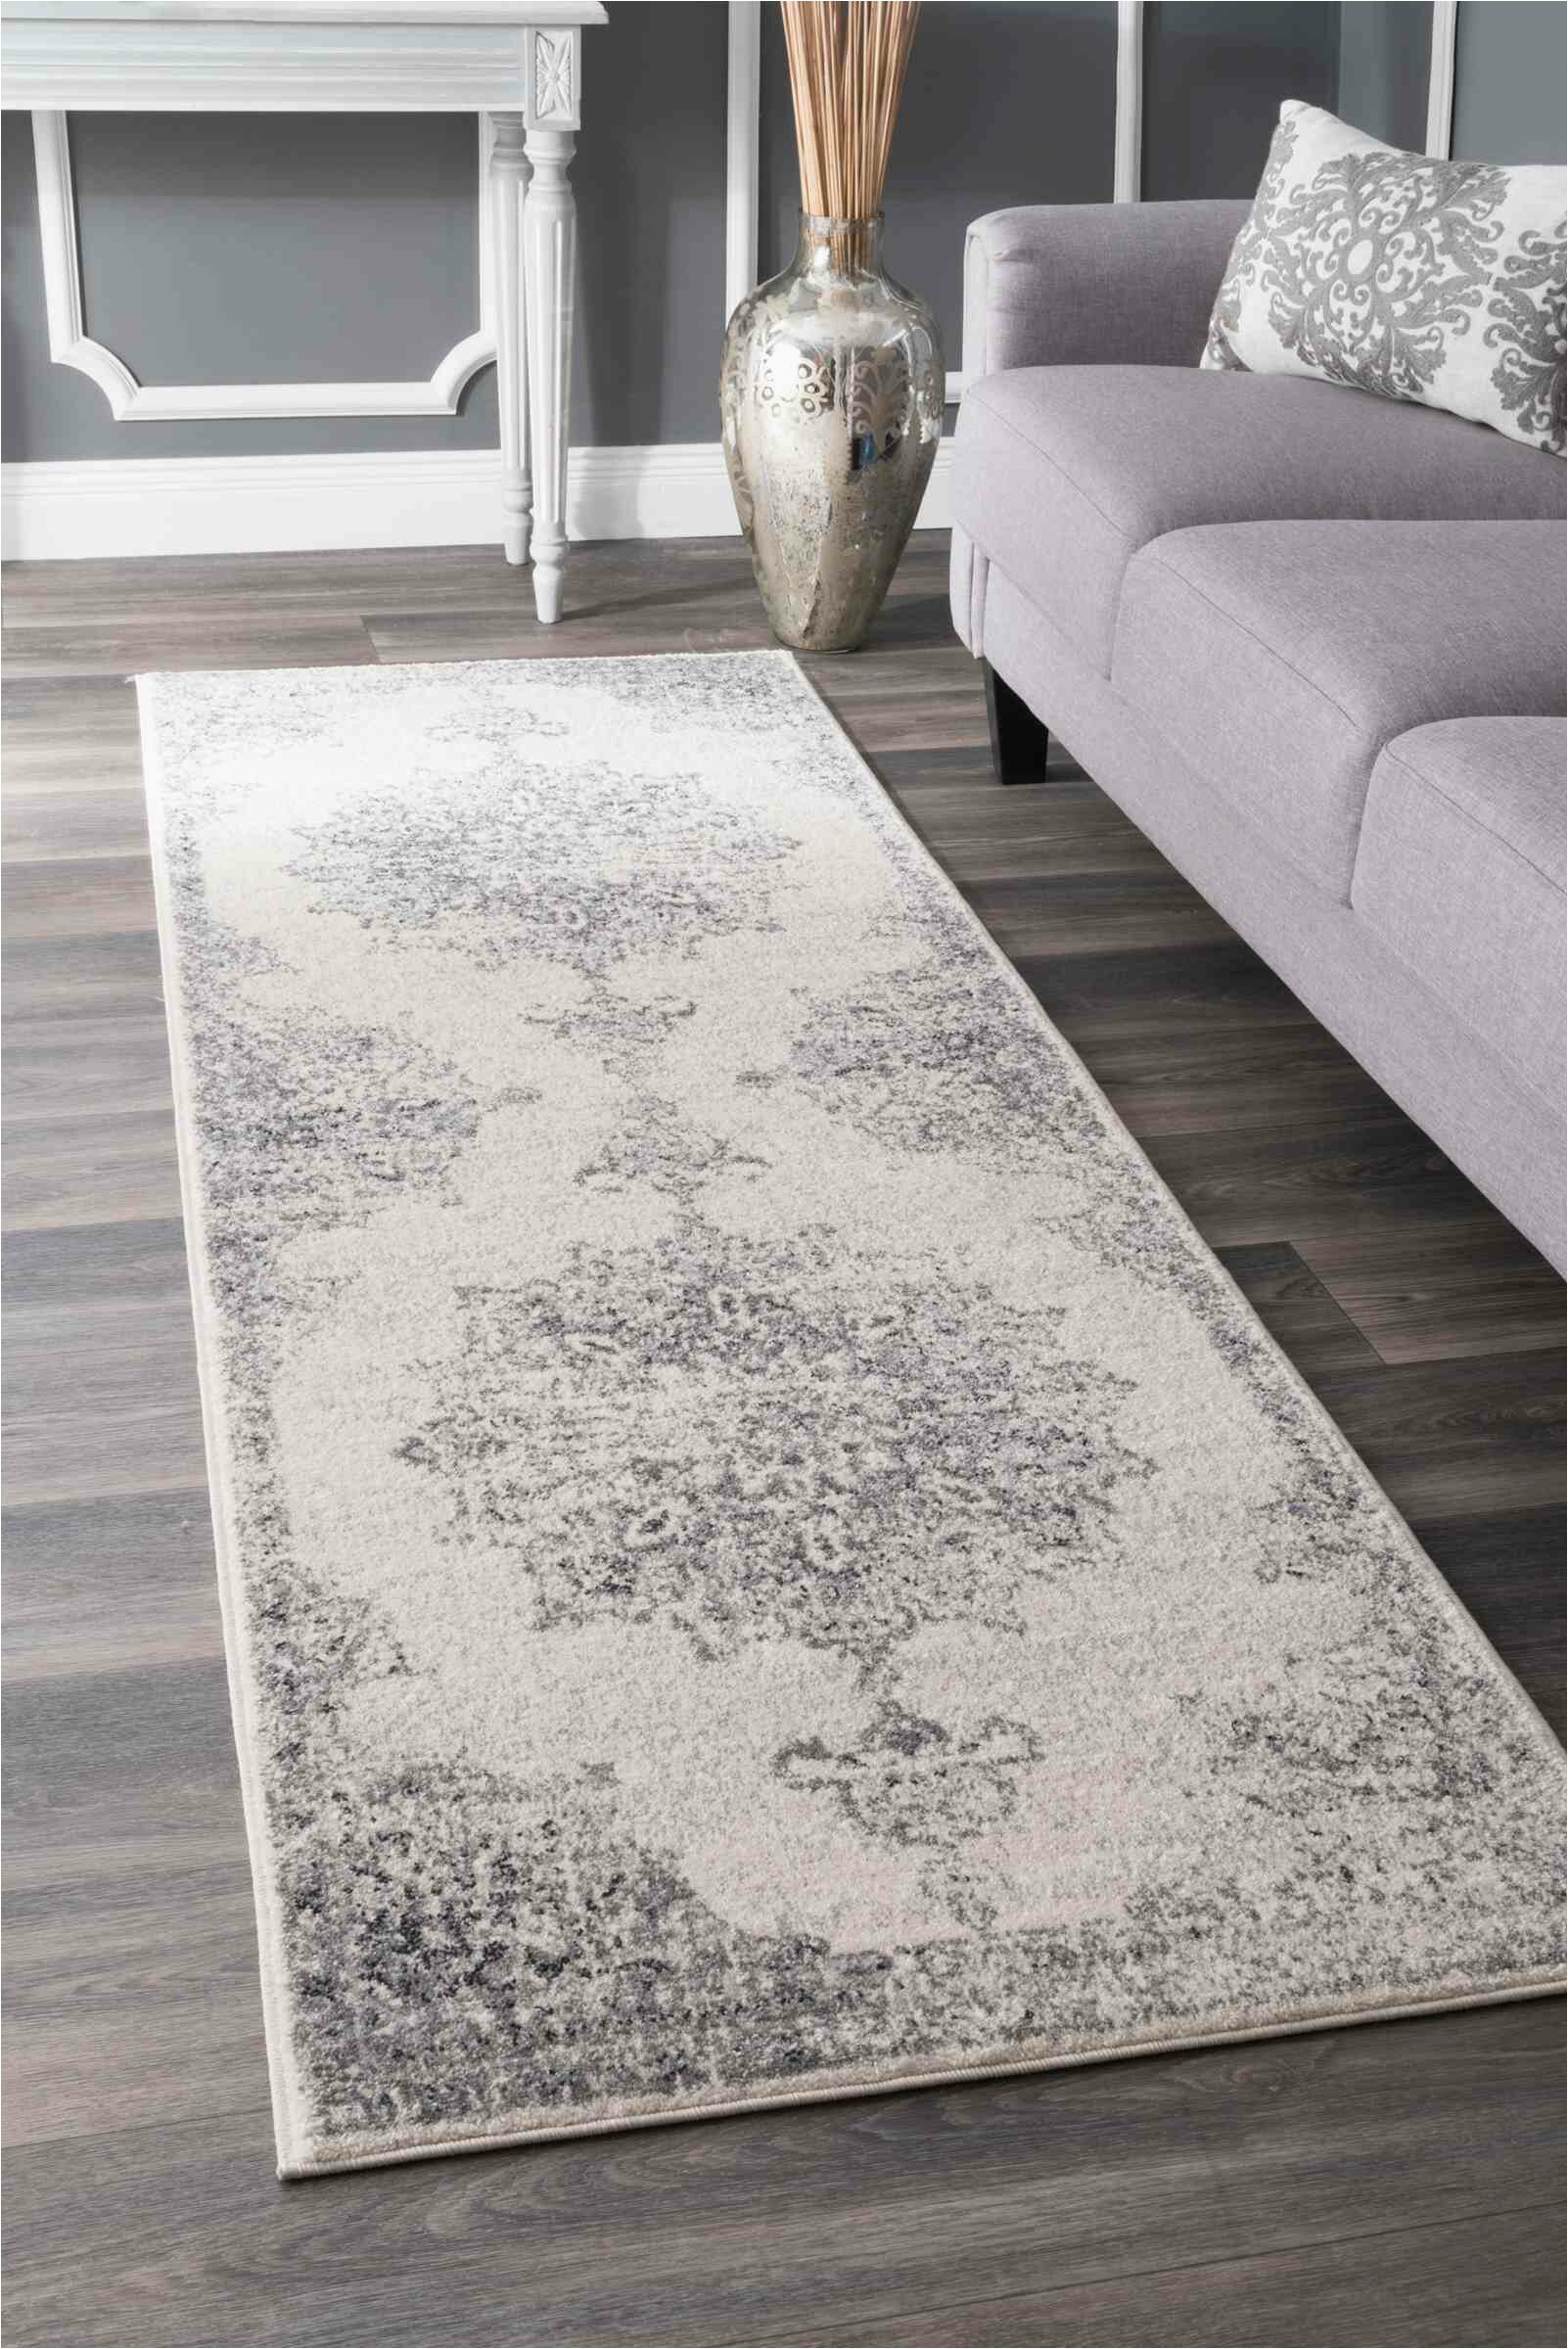 Area Rugs for Gray Floors Brookport Gray area Rug